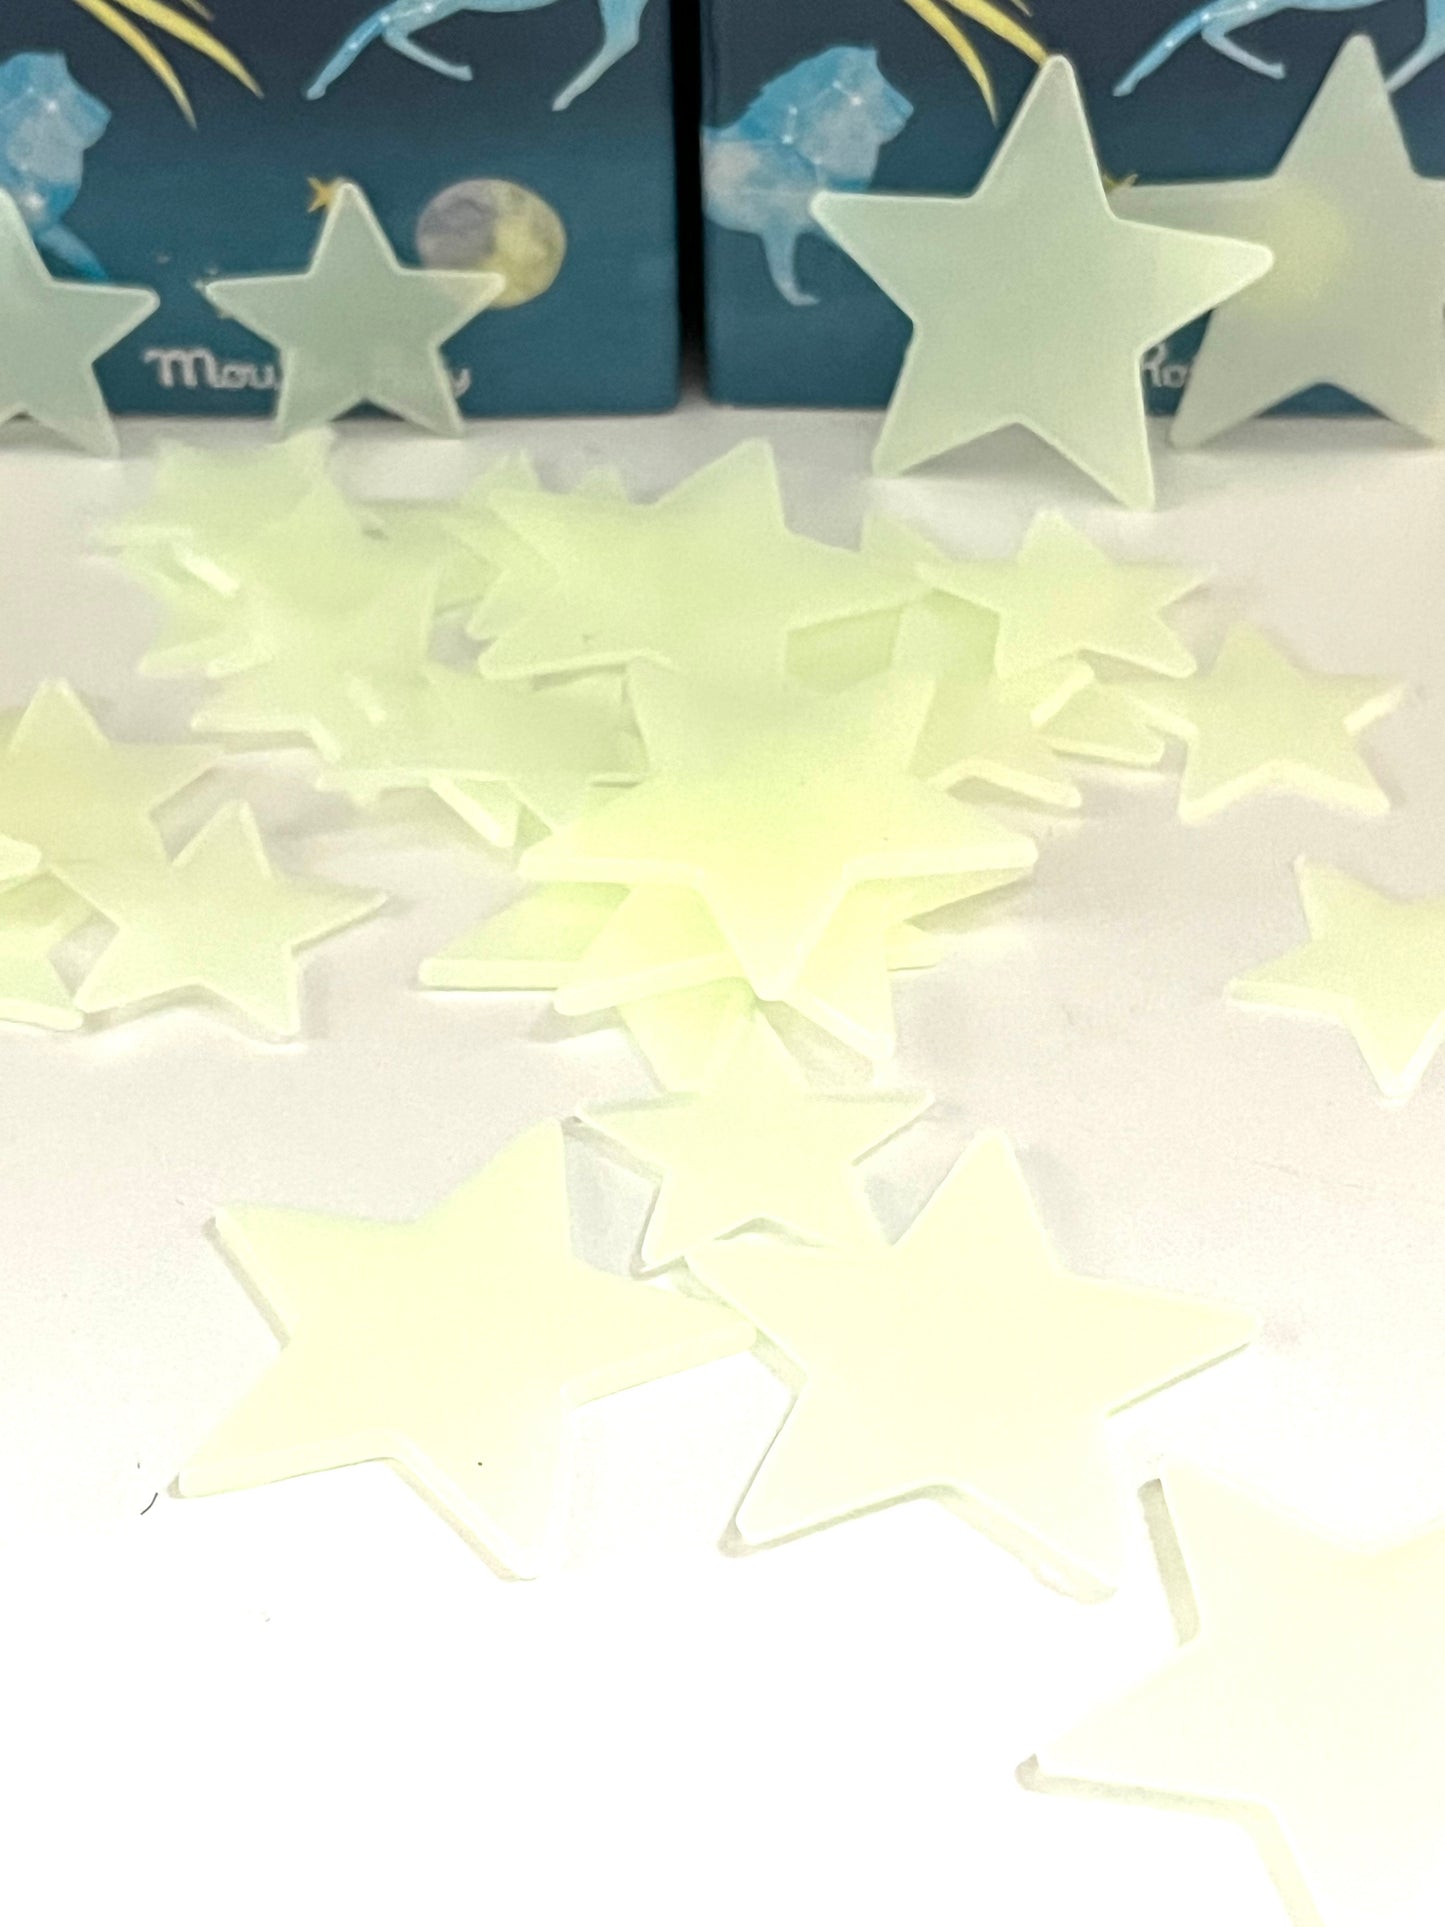 Educational Toy - STAR CONSTELLATIONS..."Glow-in-the-dark!"